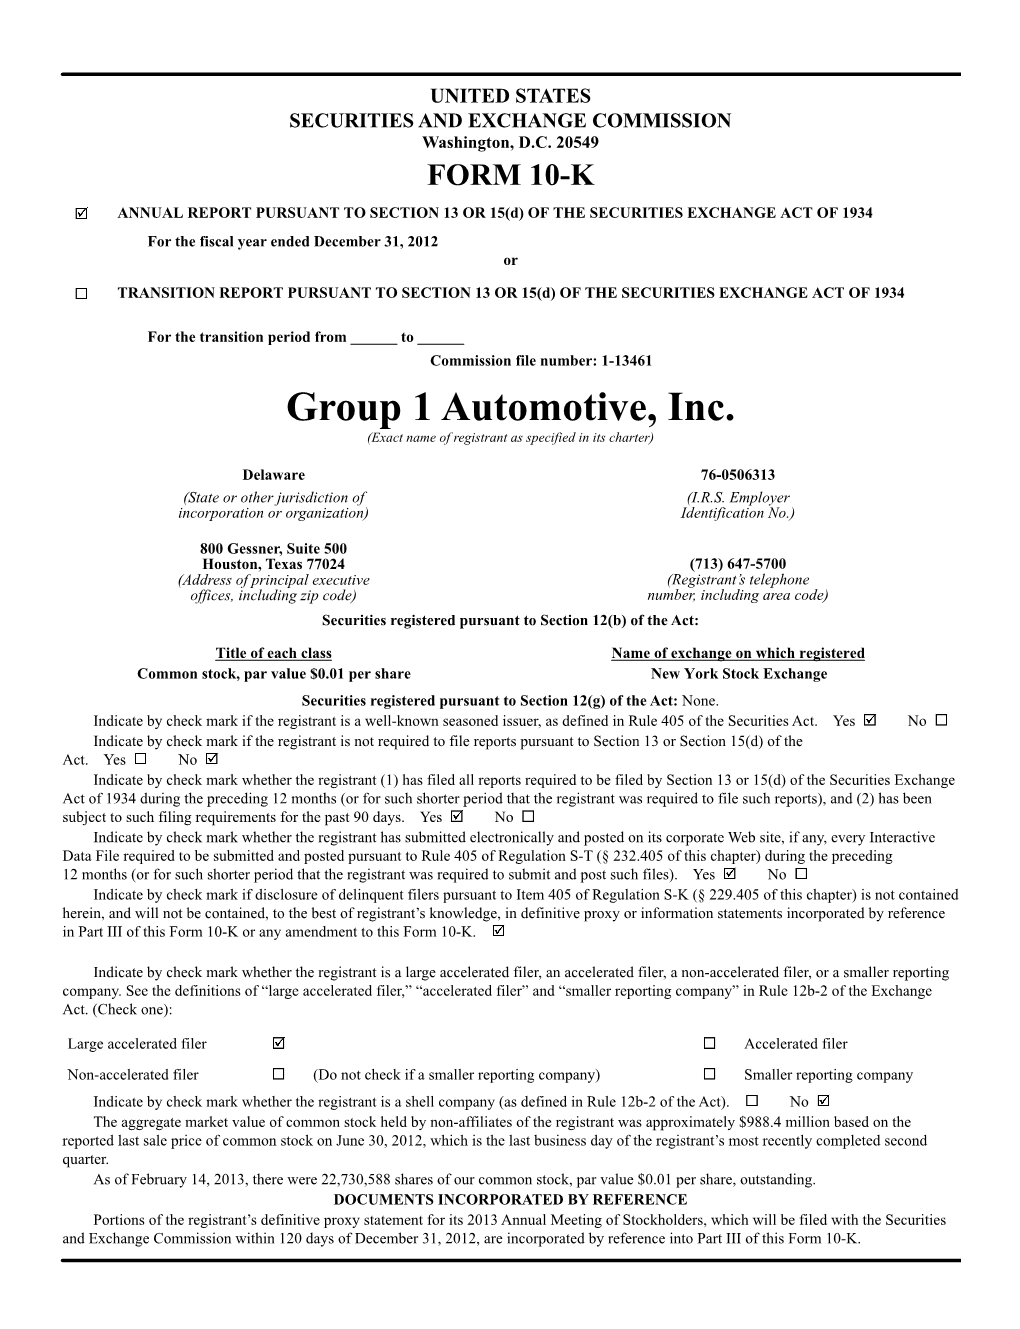 Group 1 Automotive, Inc. (Exact Name of Registrant As Specified in Its Charter)